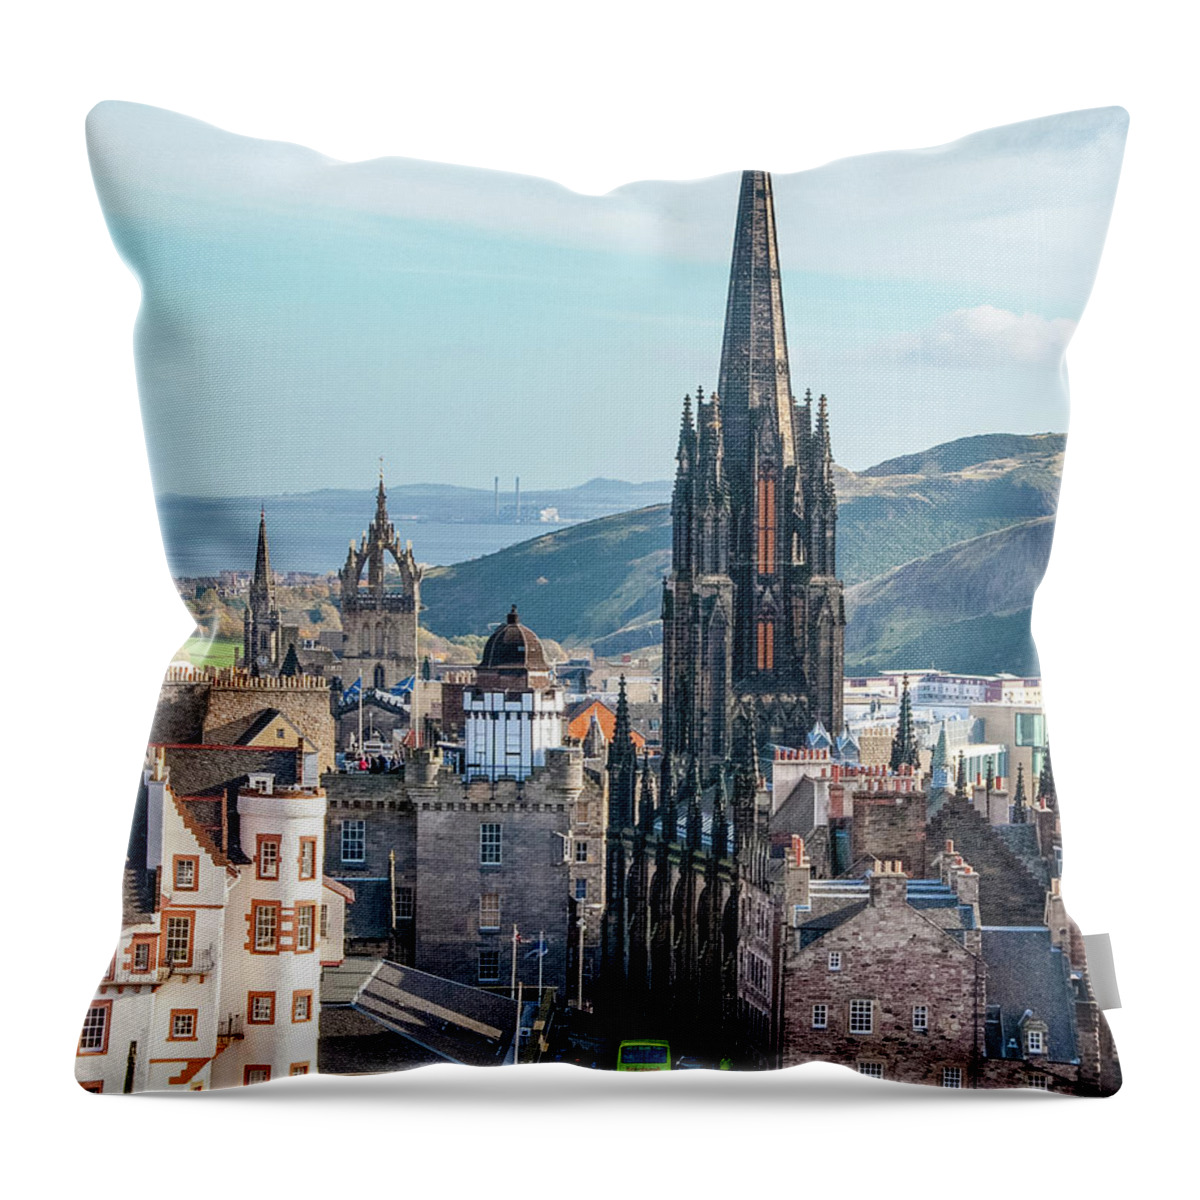 Castle Of Edinburgh Throw Pillow featuring the digital art From the Castle of Edinburgh, Scotland by SnapHappy Photos